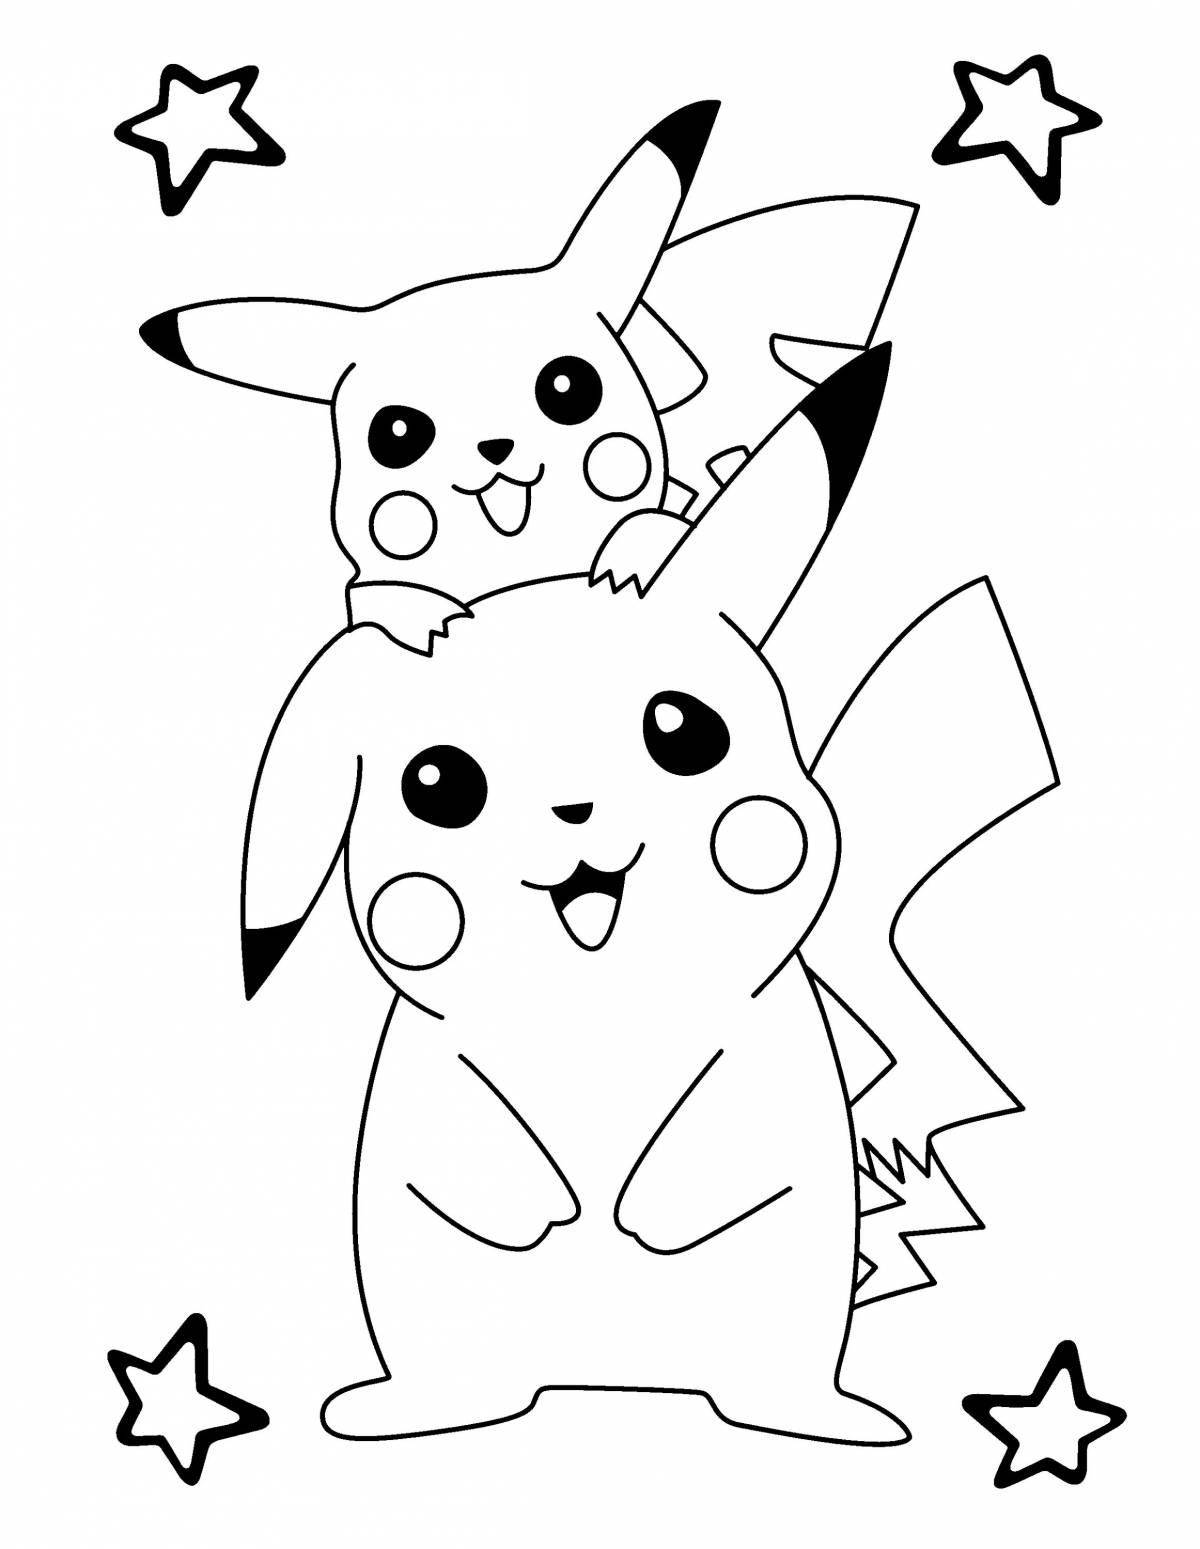 Exquisite pikachu figurine coloring page